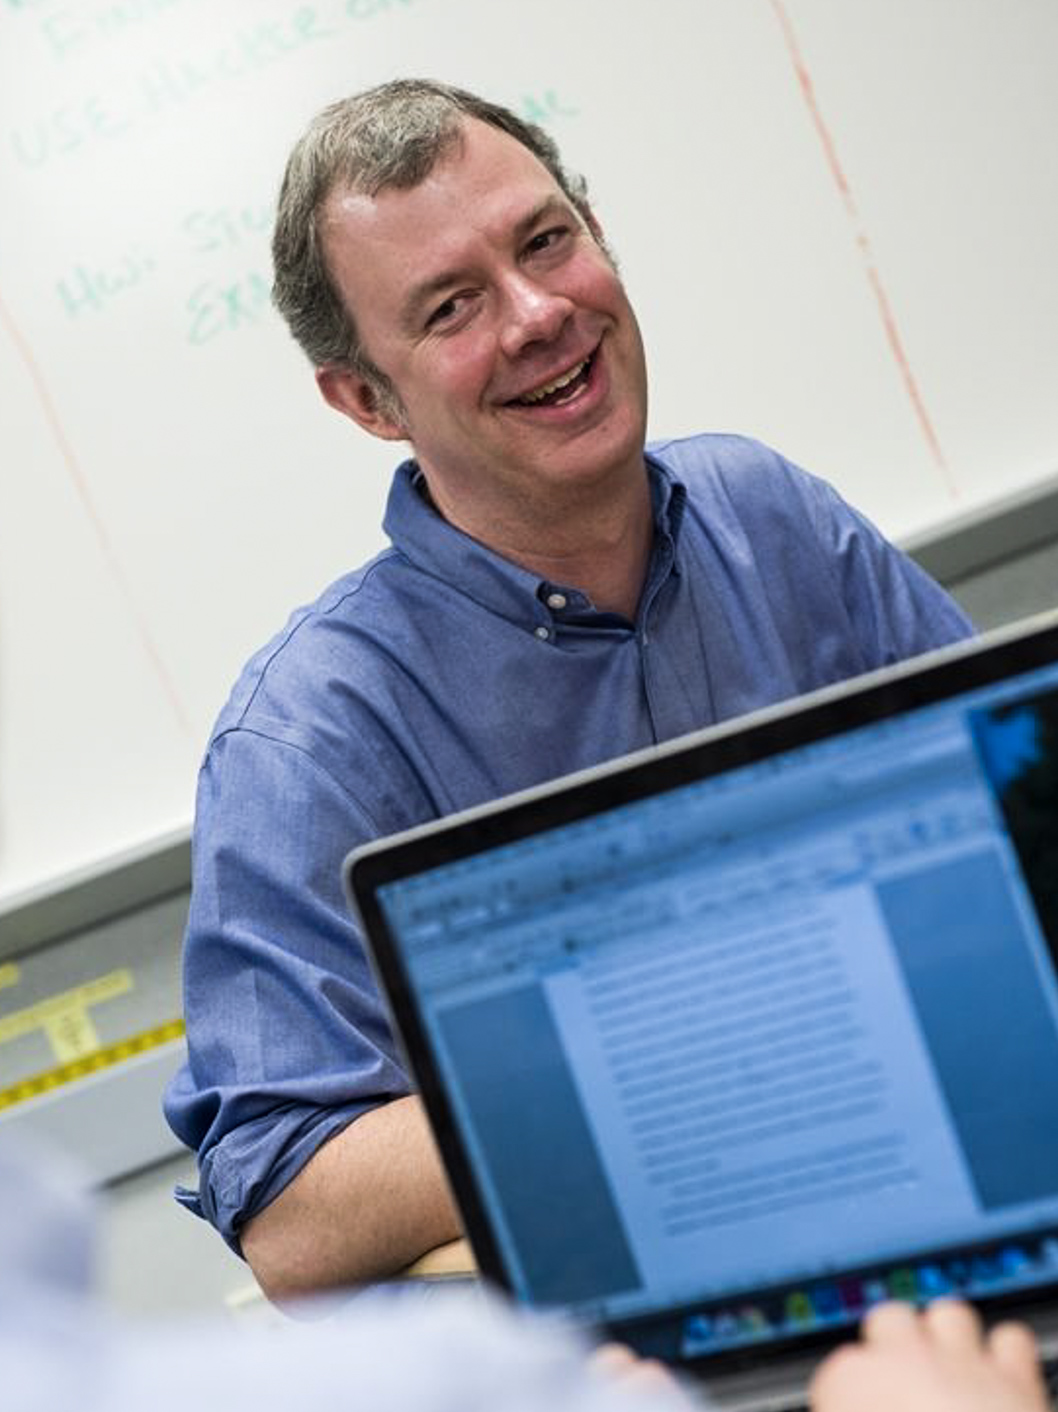 Bill Dunn, the History Department Chair at McLean, smiling while teaching a lesson